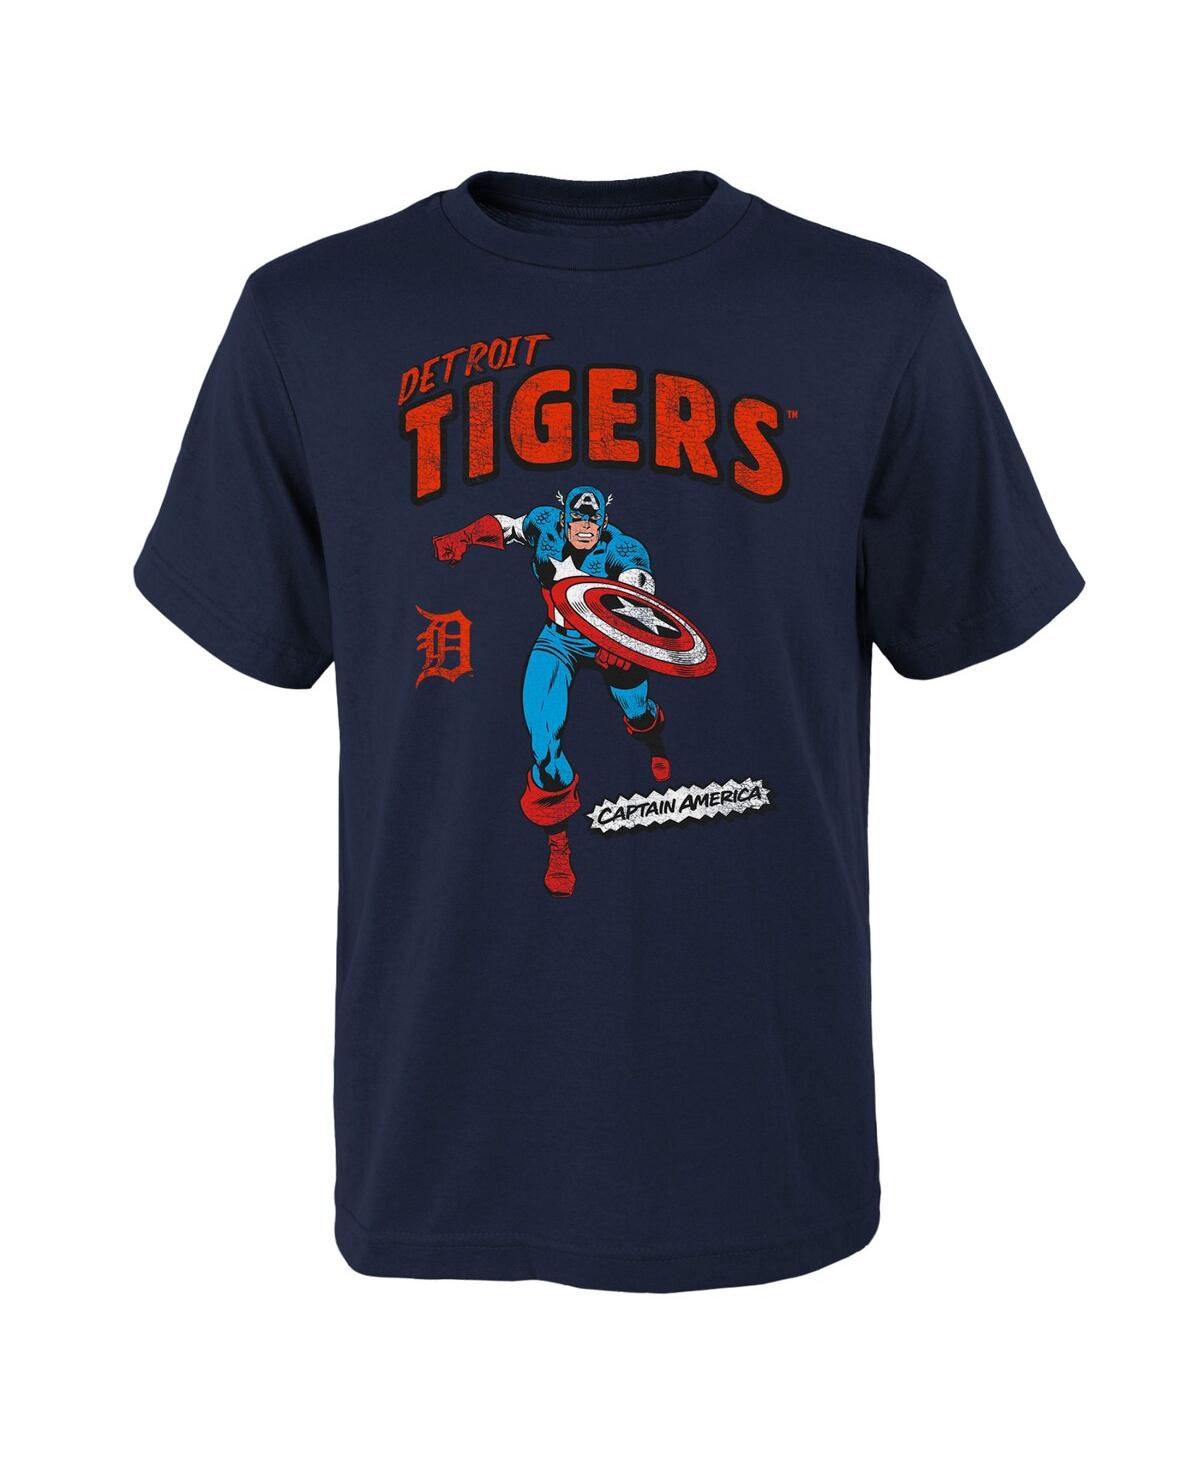 Outerstuff Kids' Big Boys And Girls Navy Detroit Tigers Team Captain America Marvel T-shirt